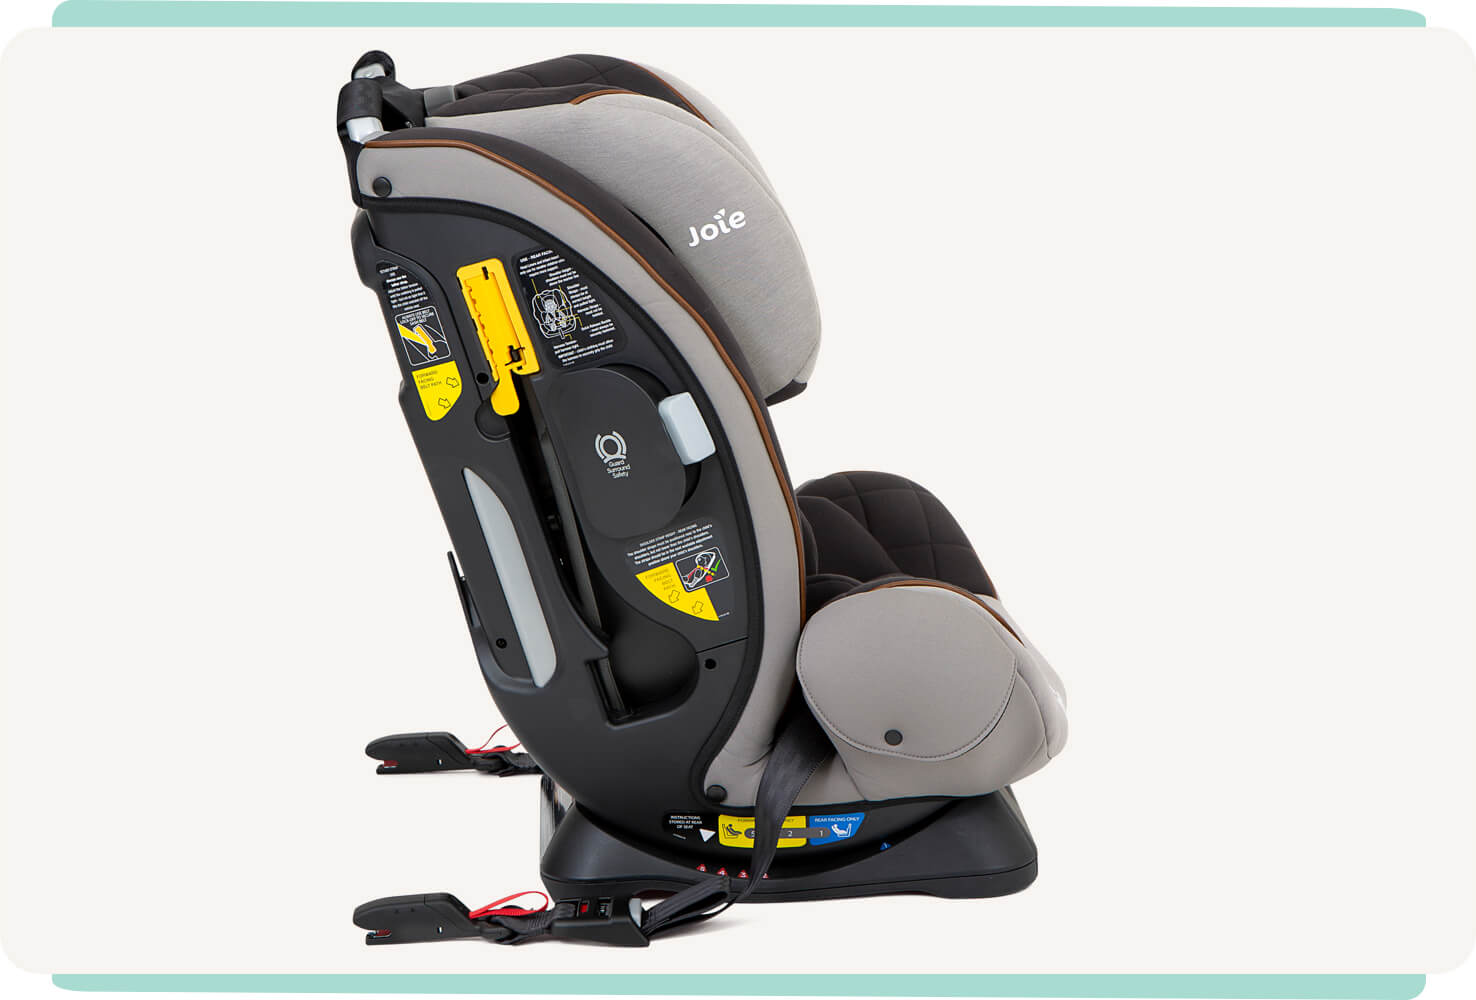 Joie armour fx car seat in black with gray details from the right profile view with headrest fully lowered and ISOFIX connectors in view. 